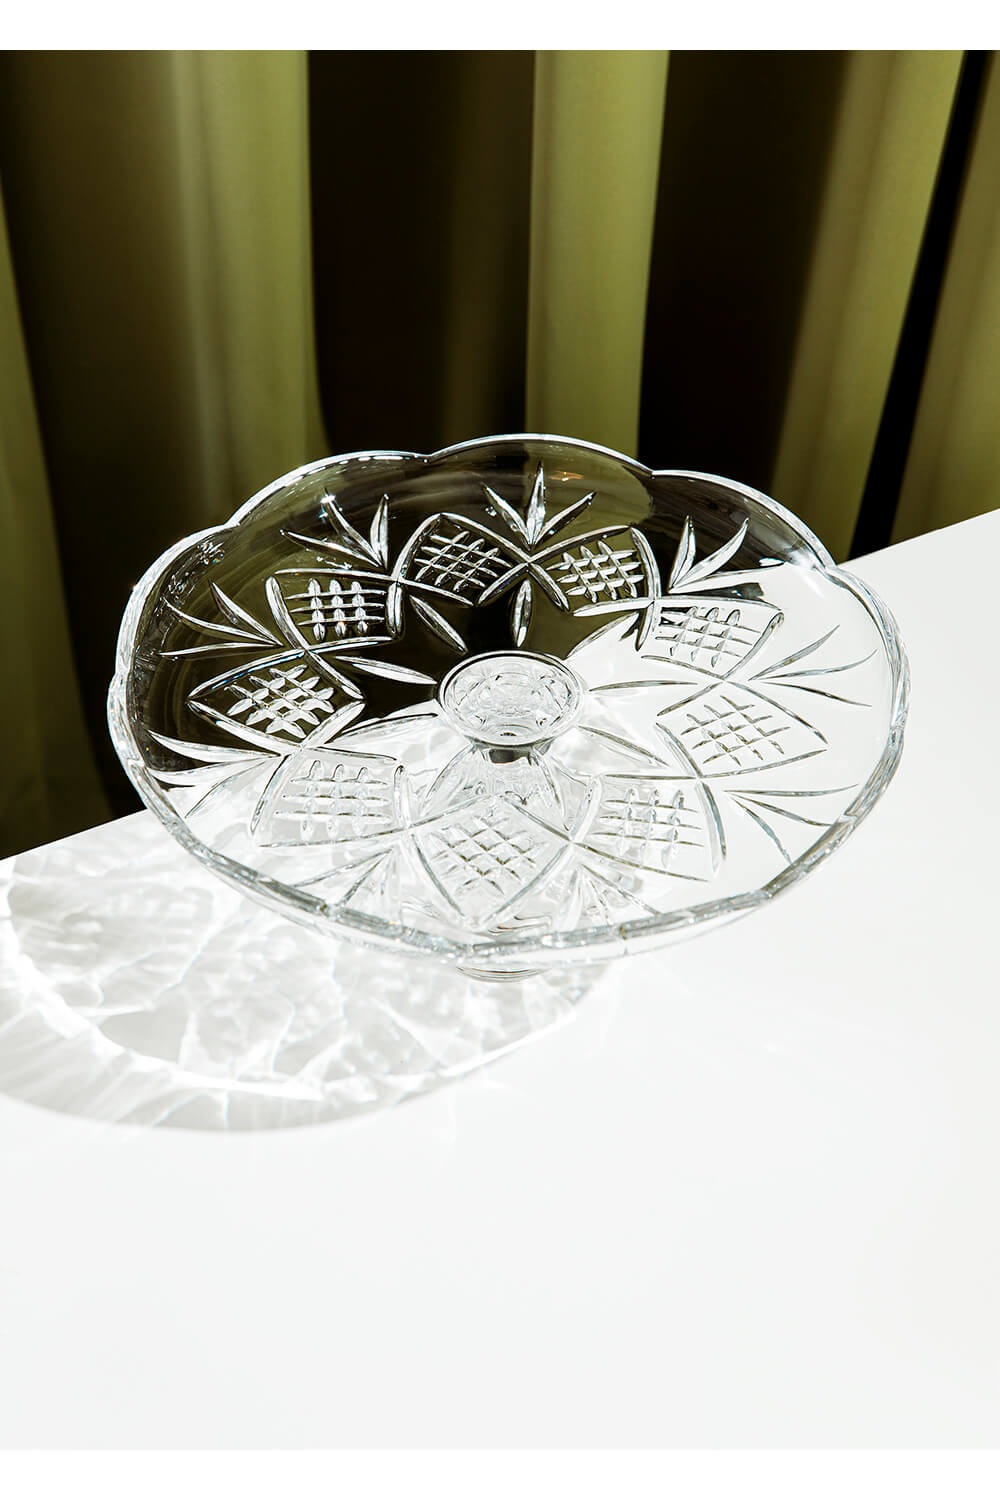 Killarney Crystal Trinity Footed Plate 1 Shaws Department Stores